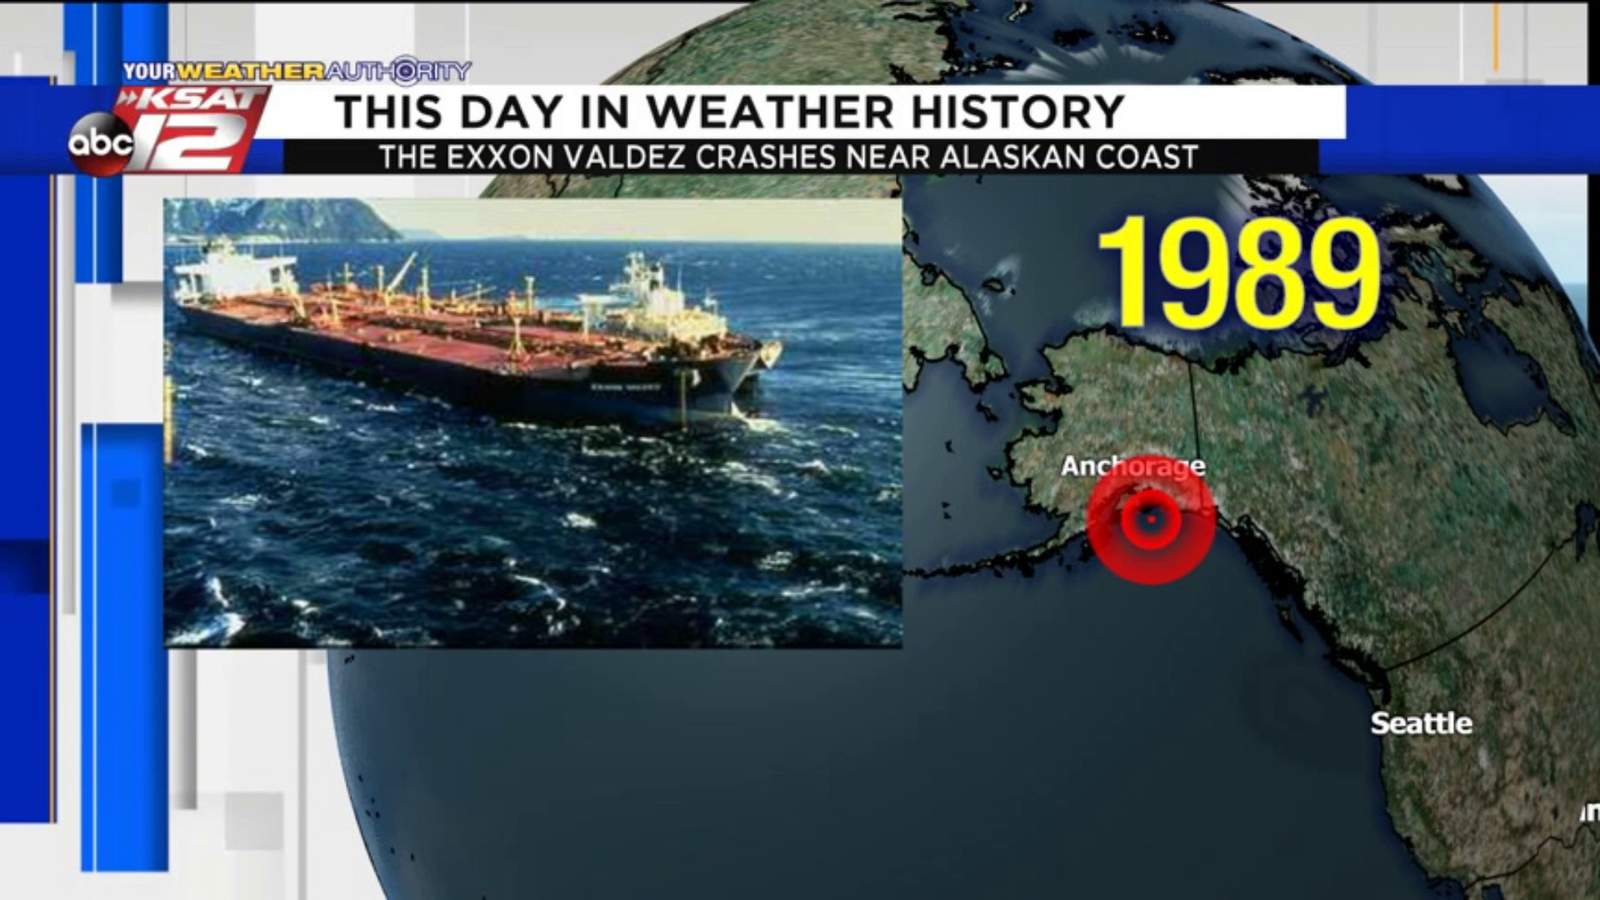 This Day in Weather History March 24th